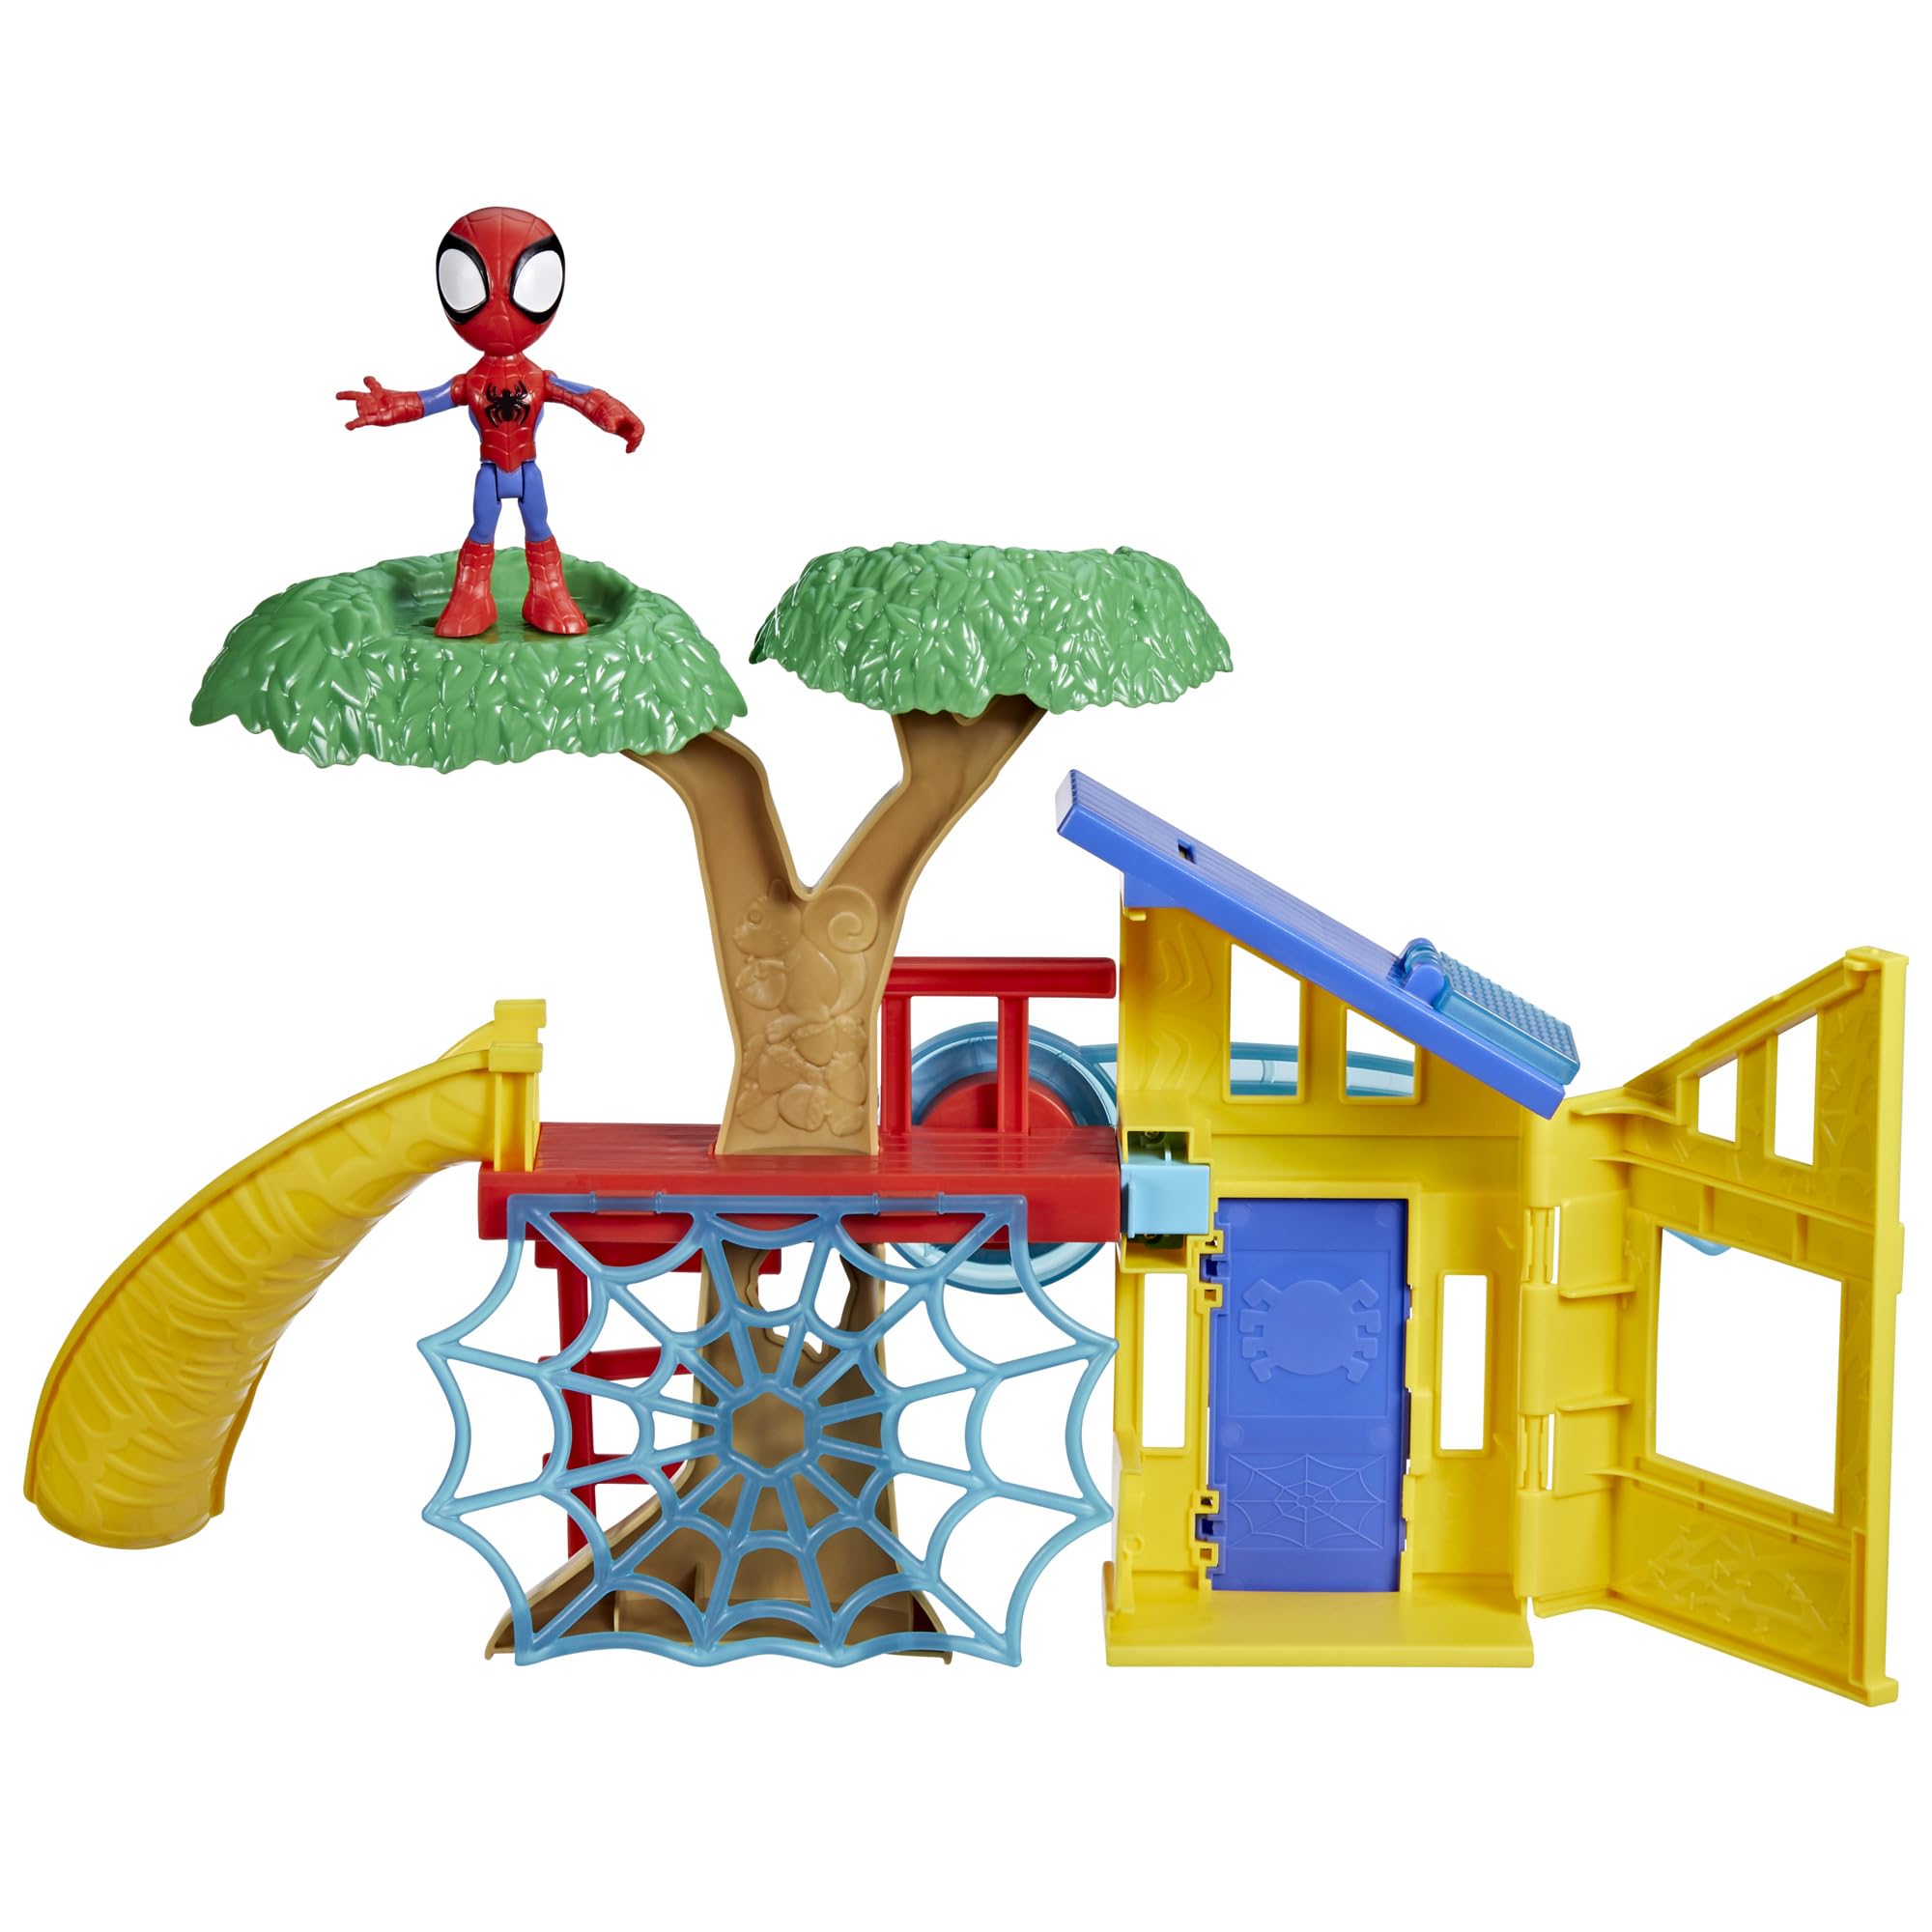 SPIDEY AND HIS AMAZING FRIENDS Spidey Playground Playset, Includes 4-Inch Action Figure, Marvel Super Hero Toys for Kids 3 and Up